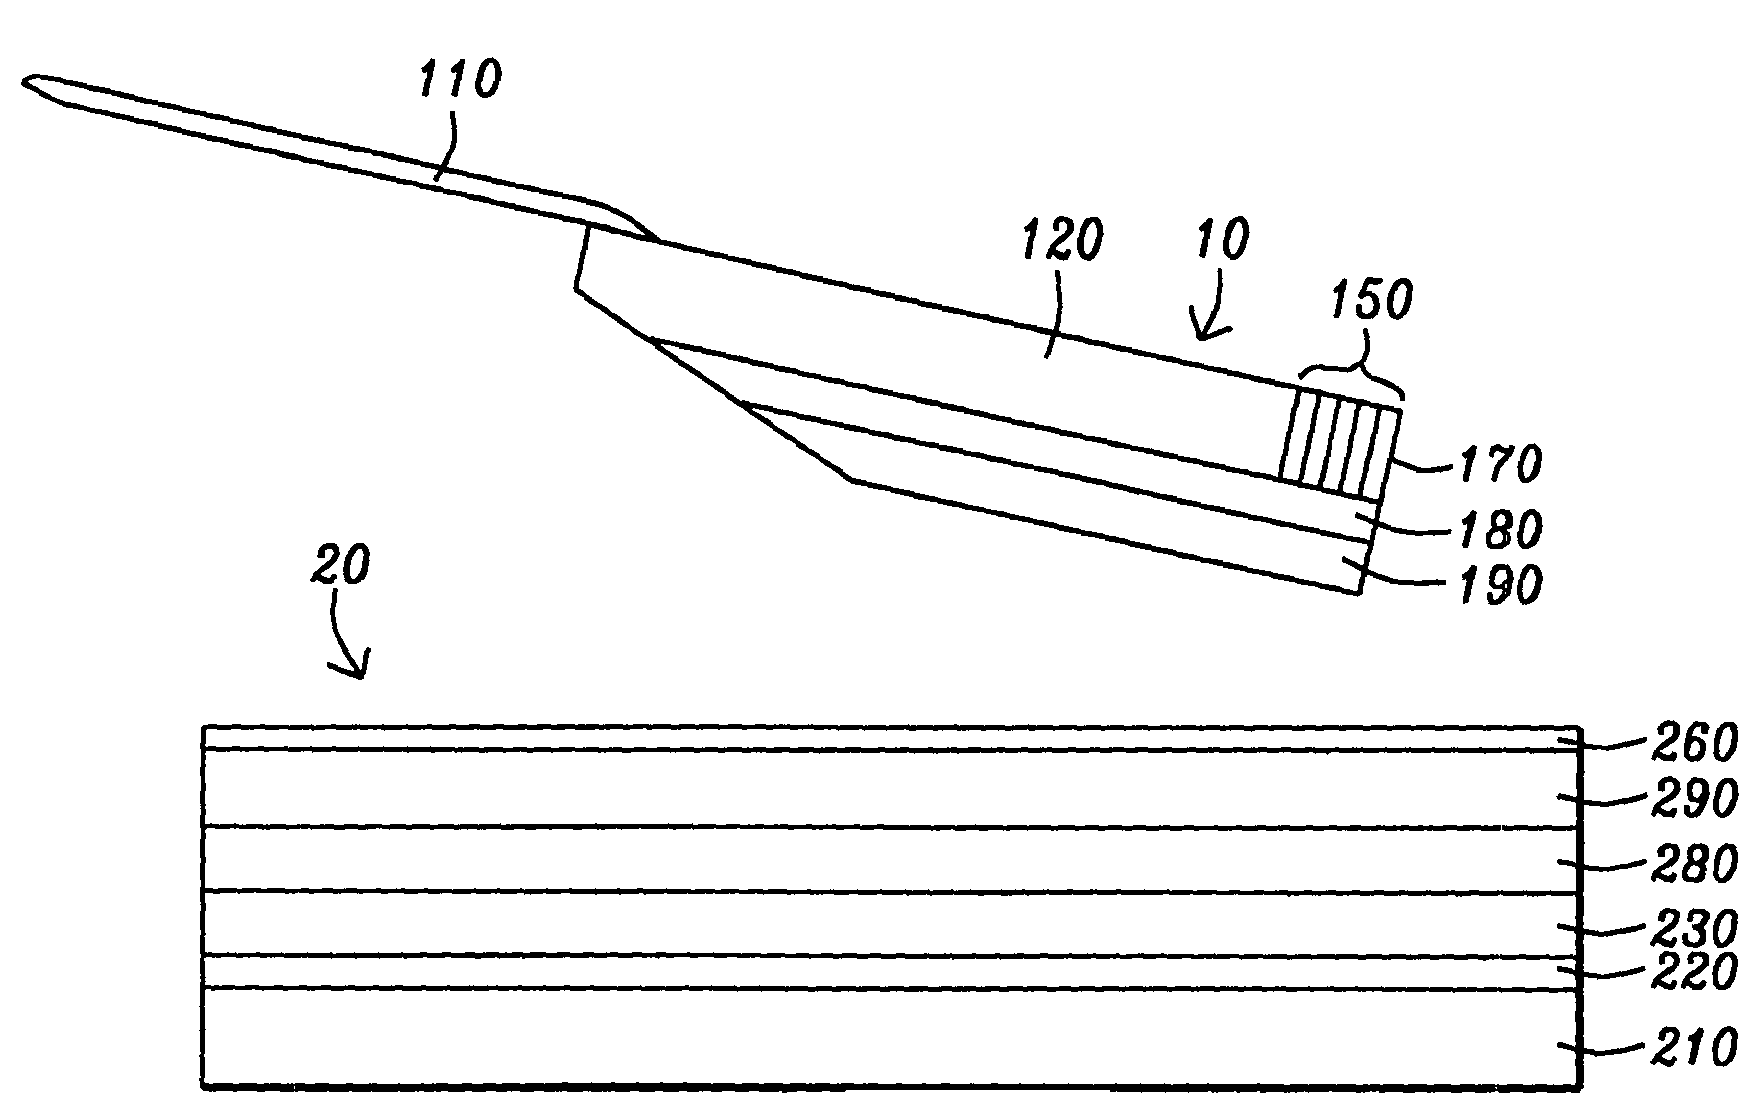 Magnetic recording head and media comprising aluminum oxynitride underlayer and a diamond-like carbon overcoat